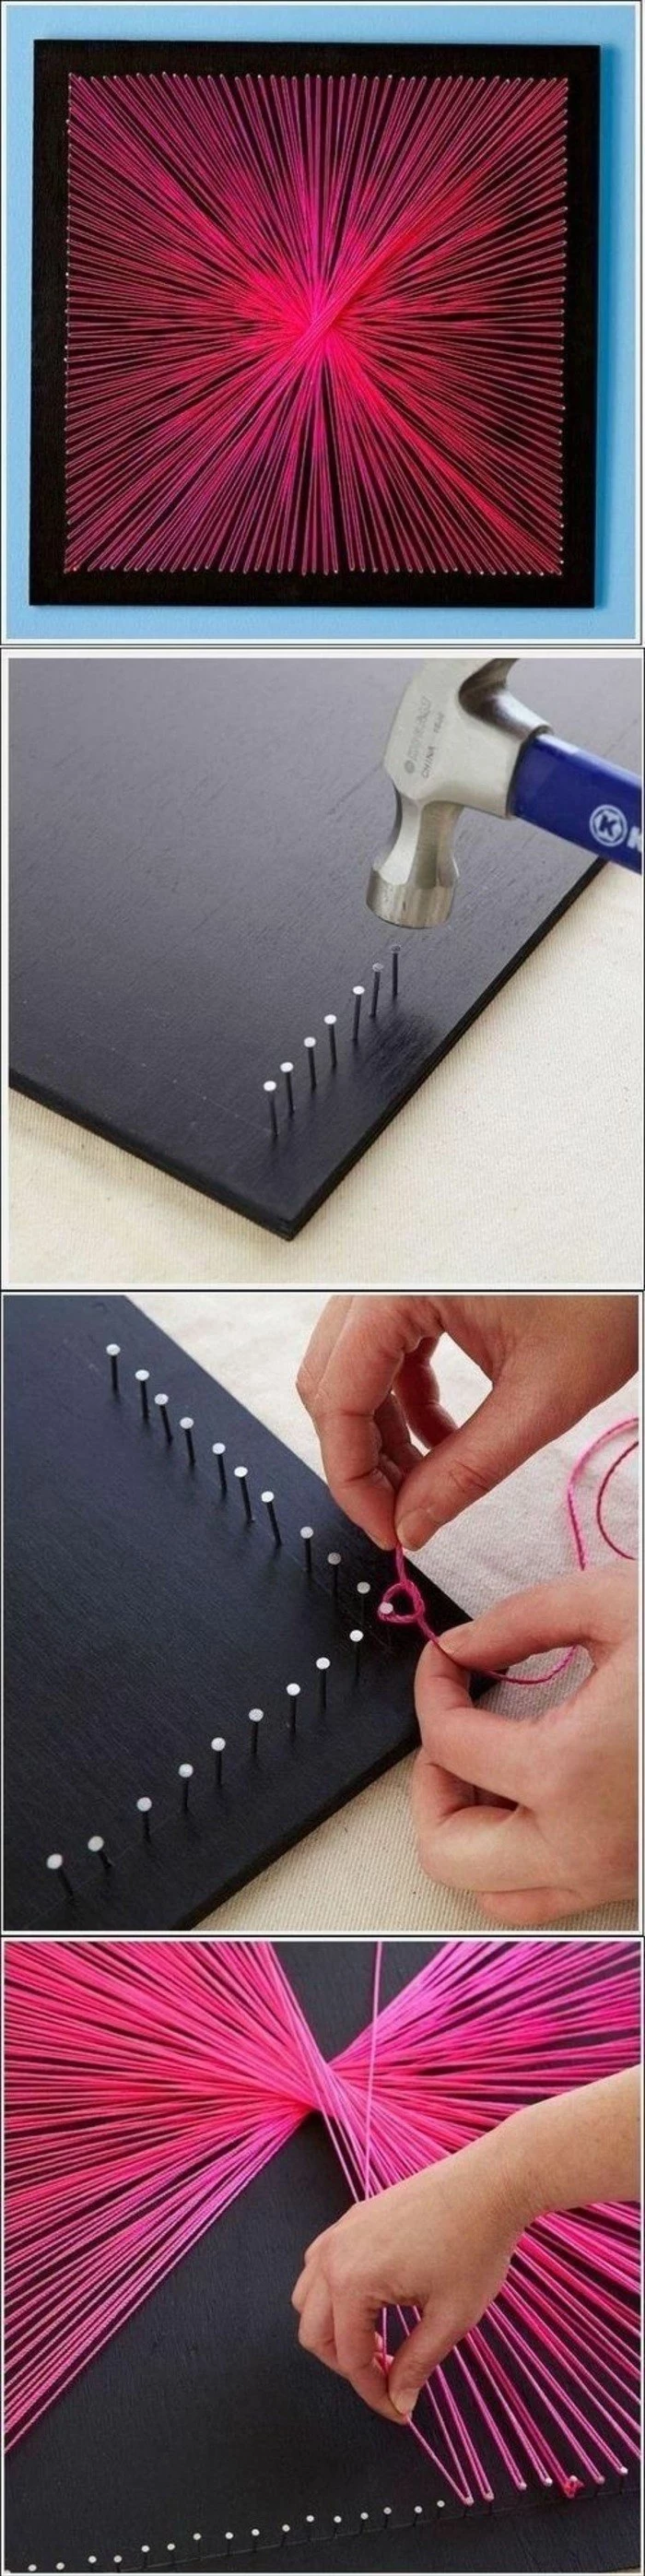 black board, pink strand, held by nails, forming an intricate shape, unique wall decor, diy tutorial